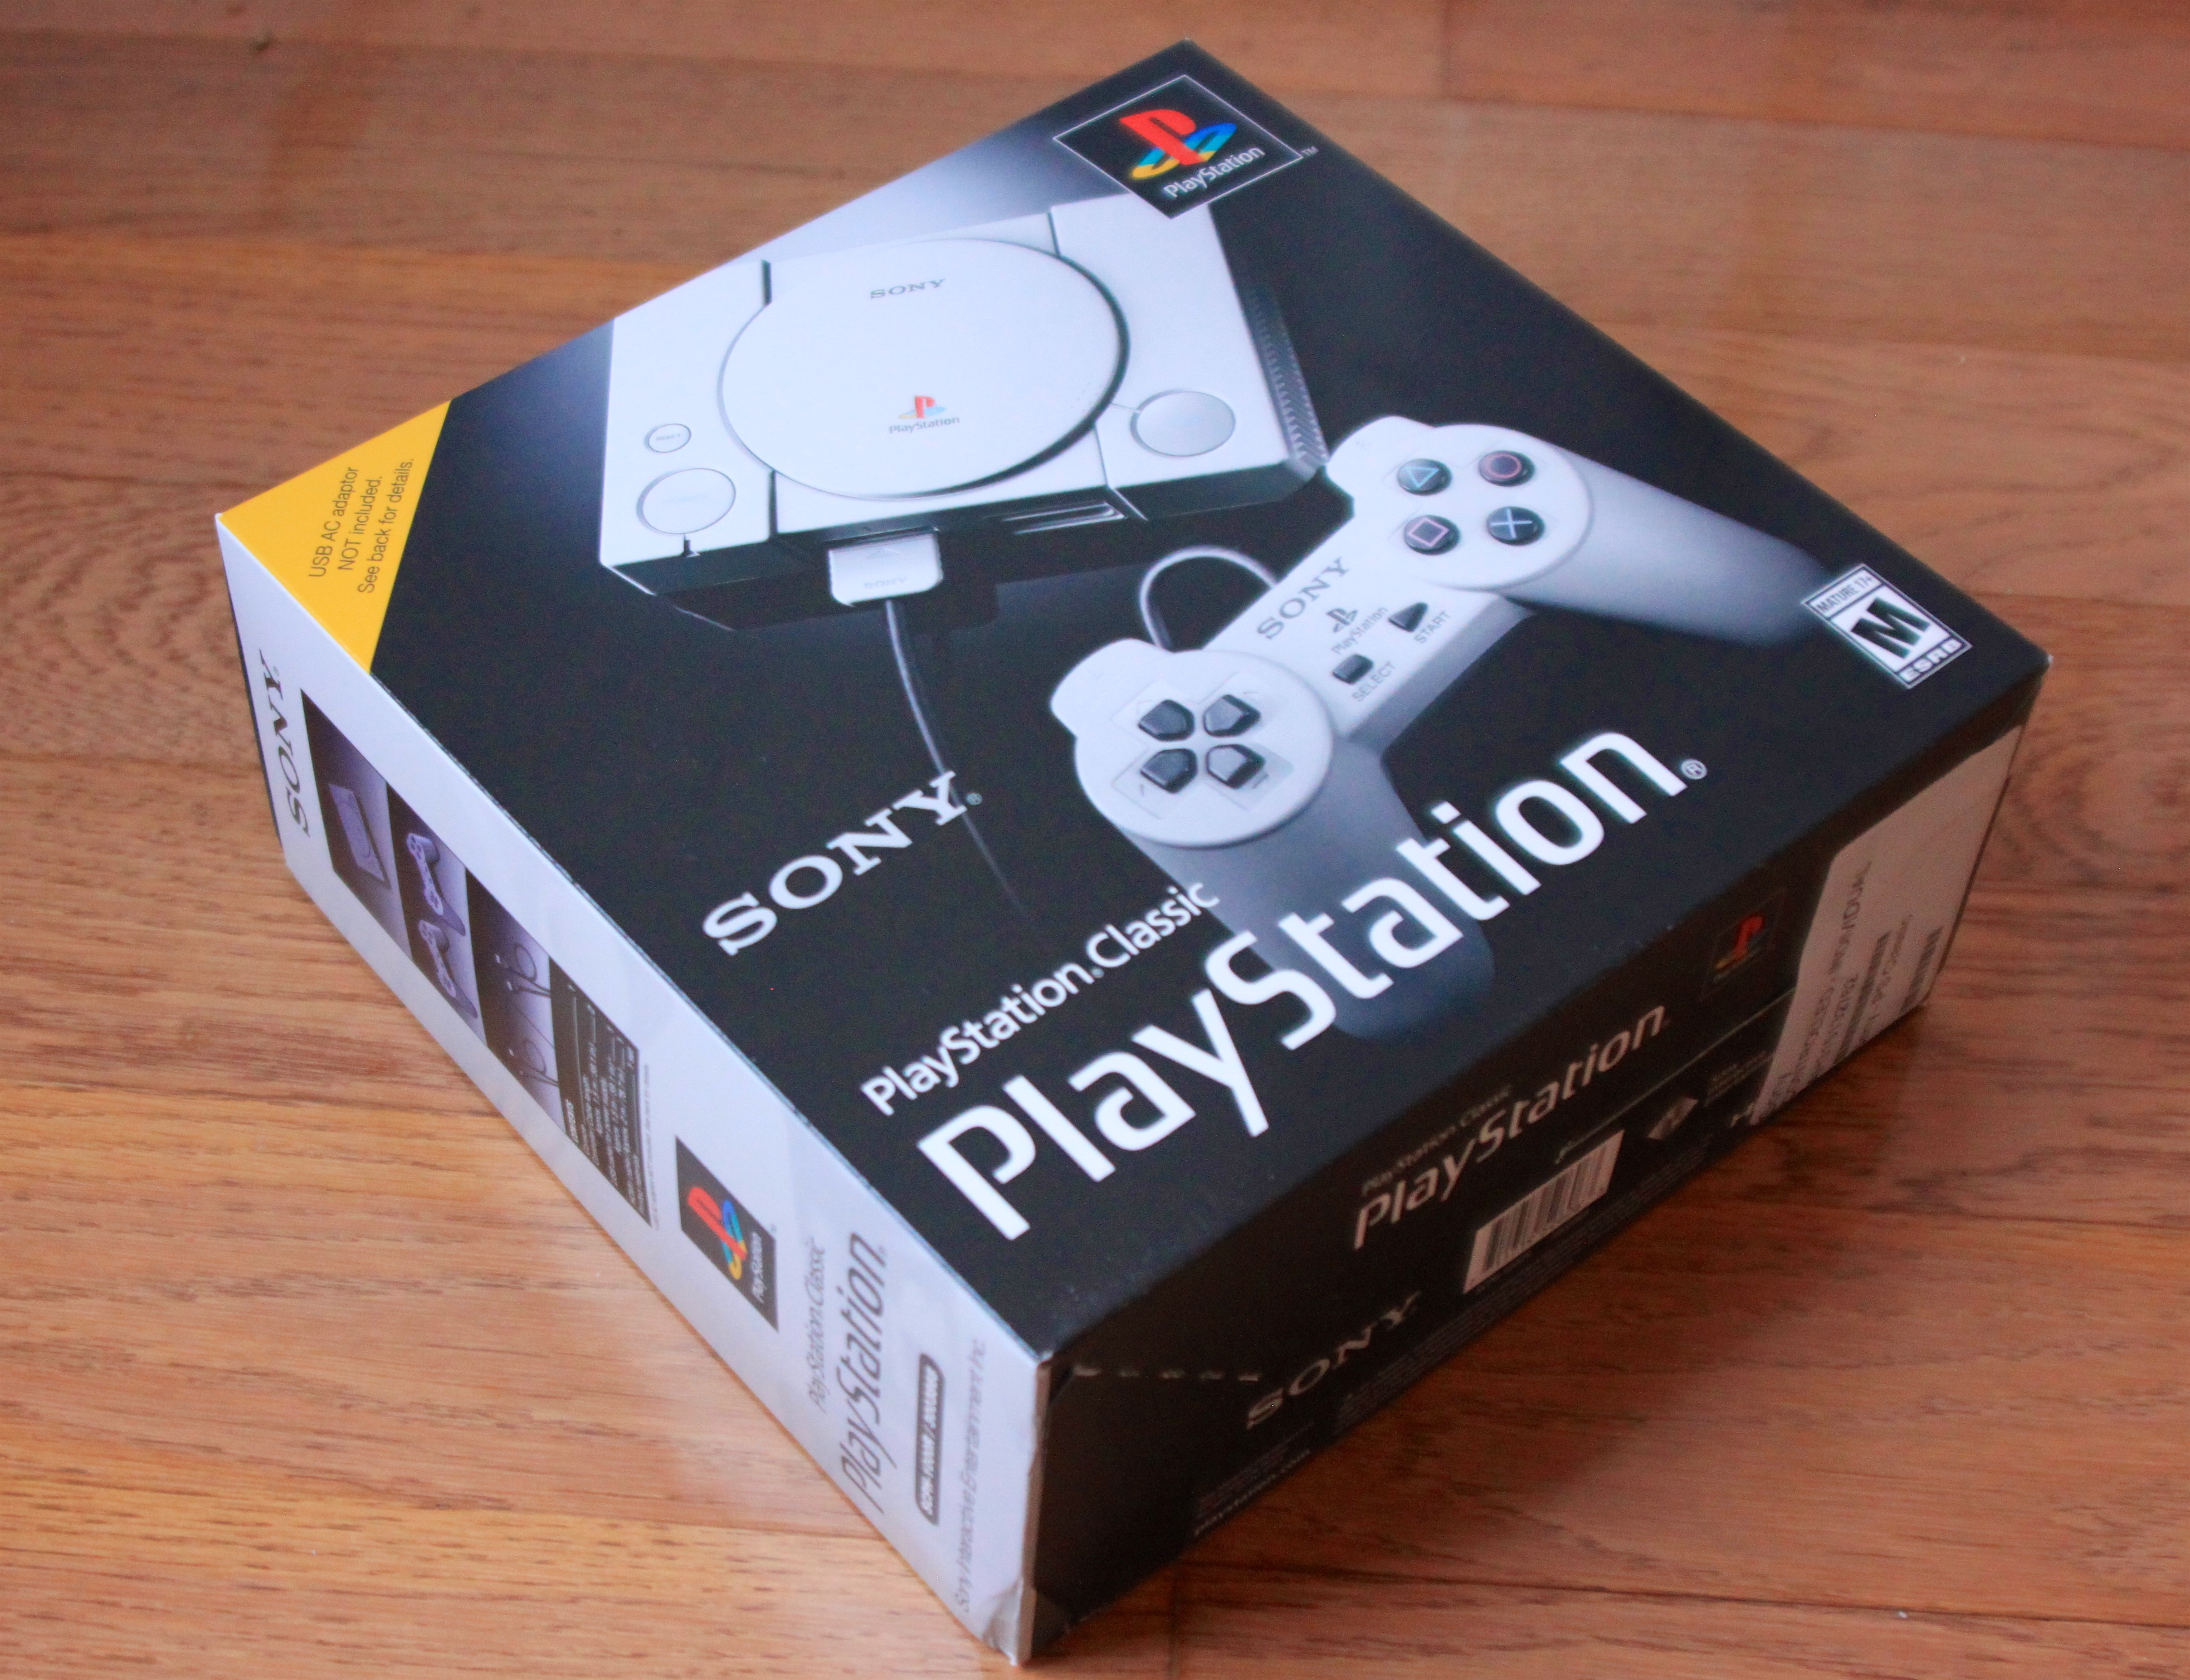 Sony's $100 Mini PlayStation 1, the PlayStation Classic: REVIEW